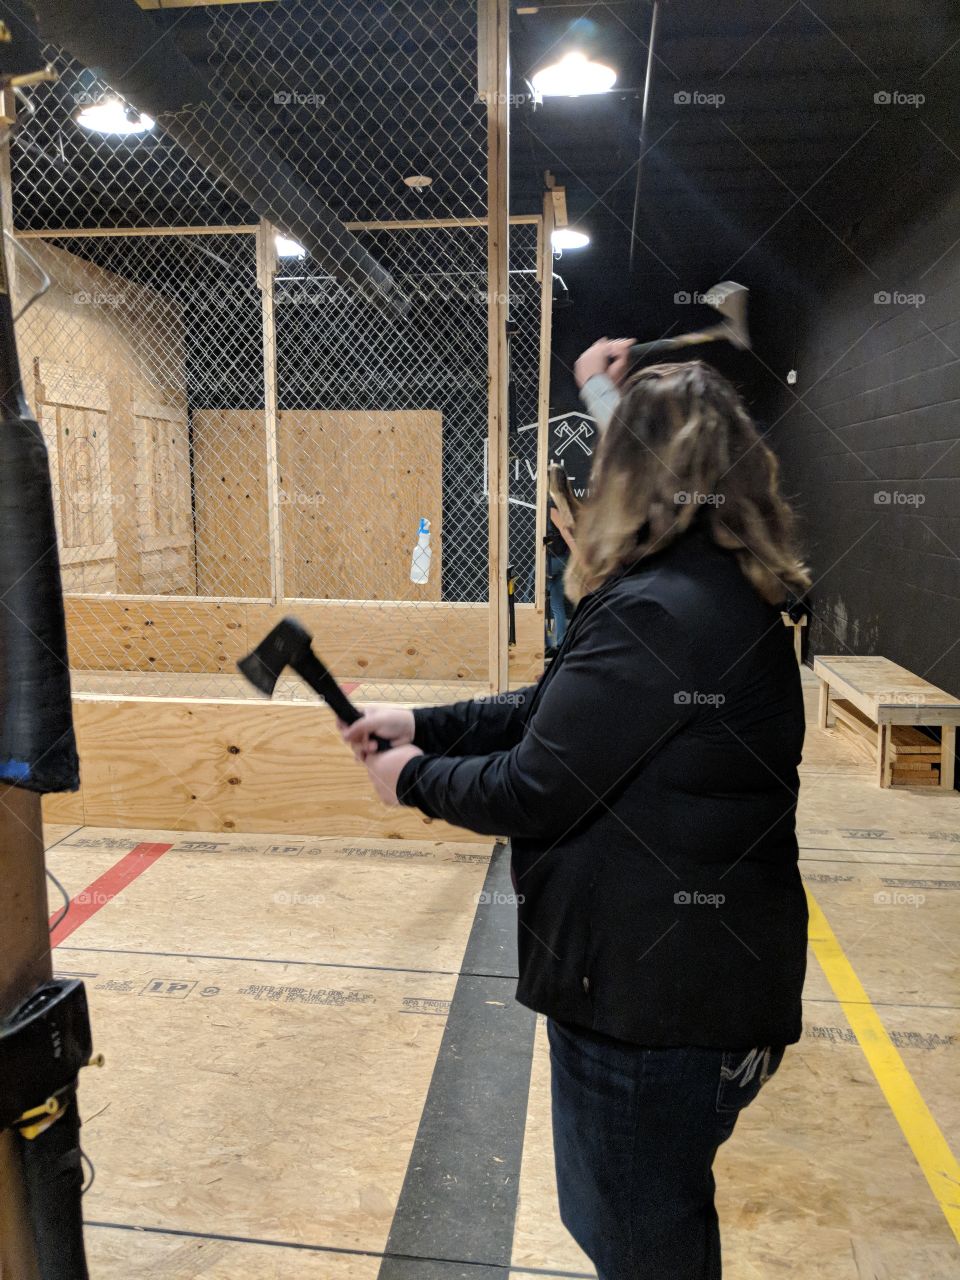 ax throwing